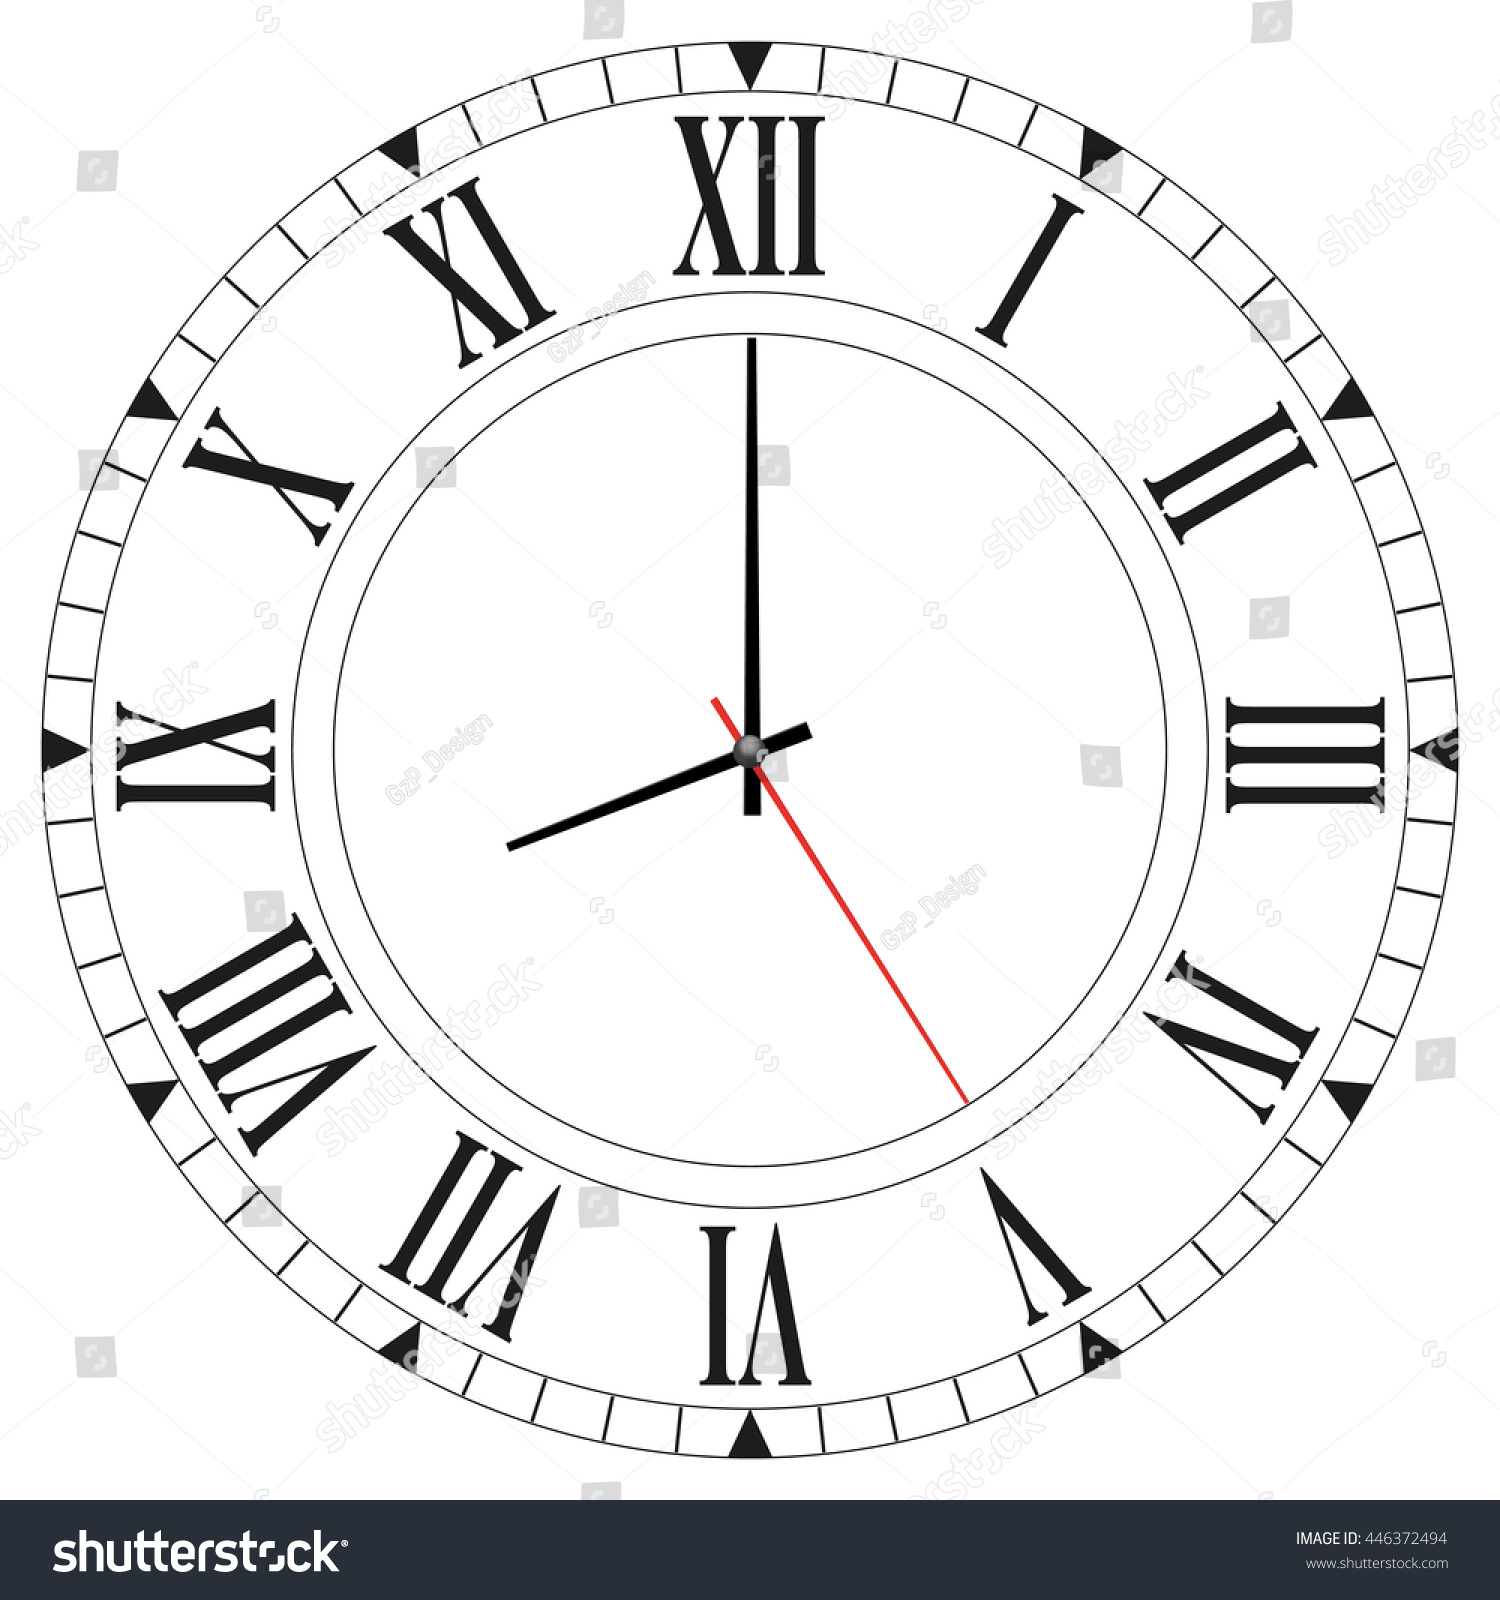 Vintage Clock Face On White Background Stock Vector 446372494 ...